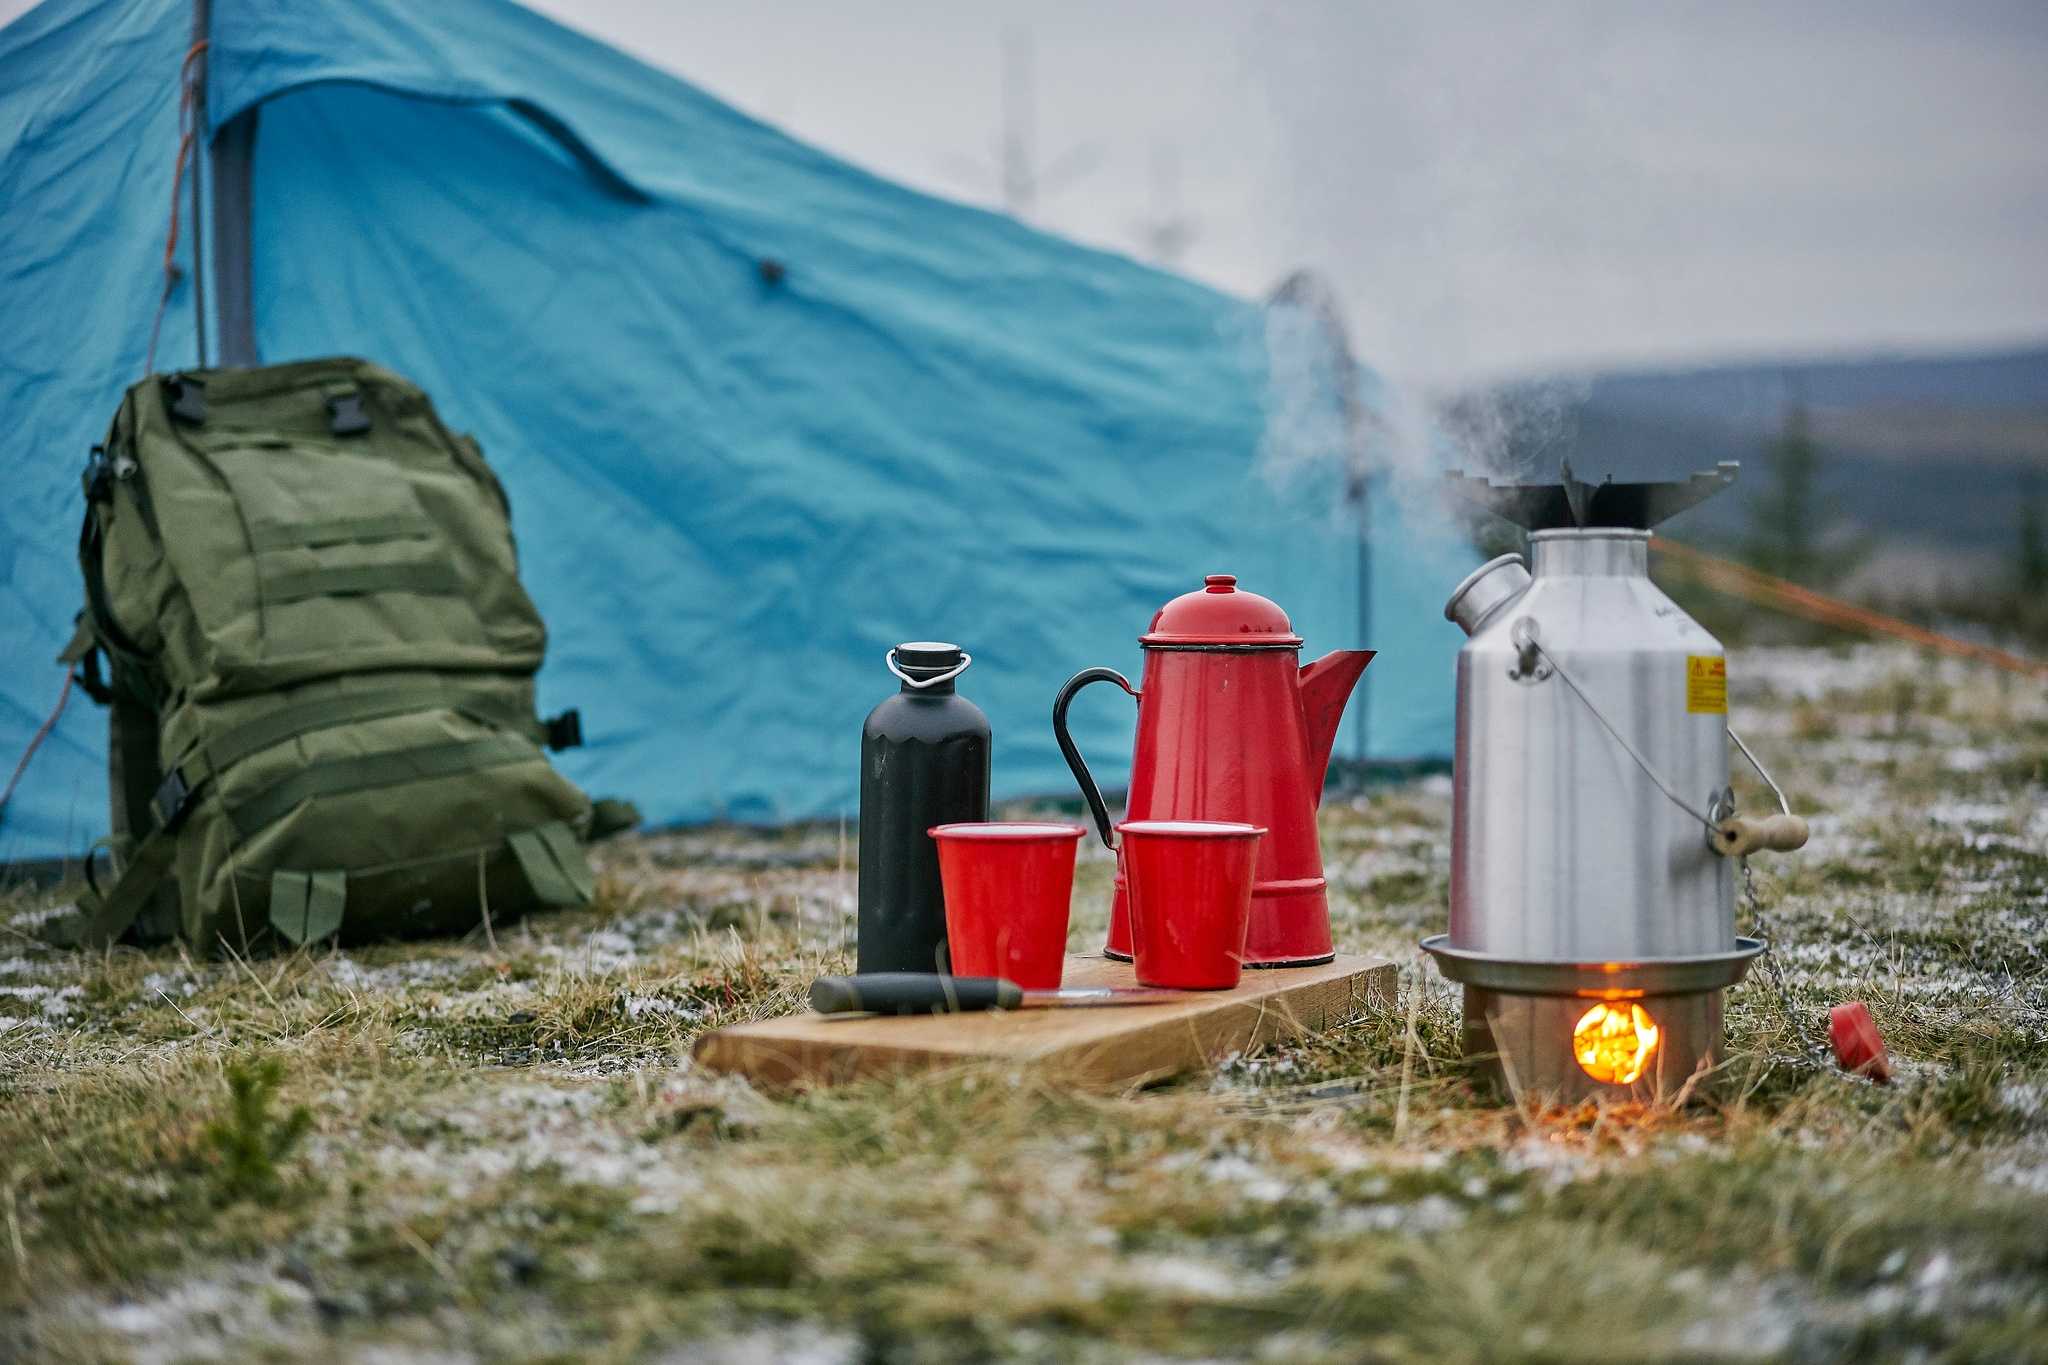 Complete guide to Bivouac / wild camping: Definition, essential gear, tips